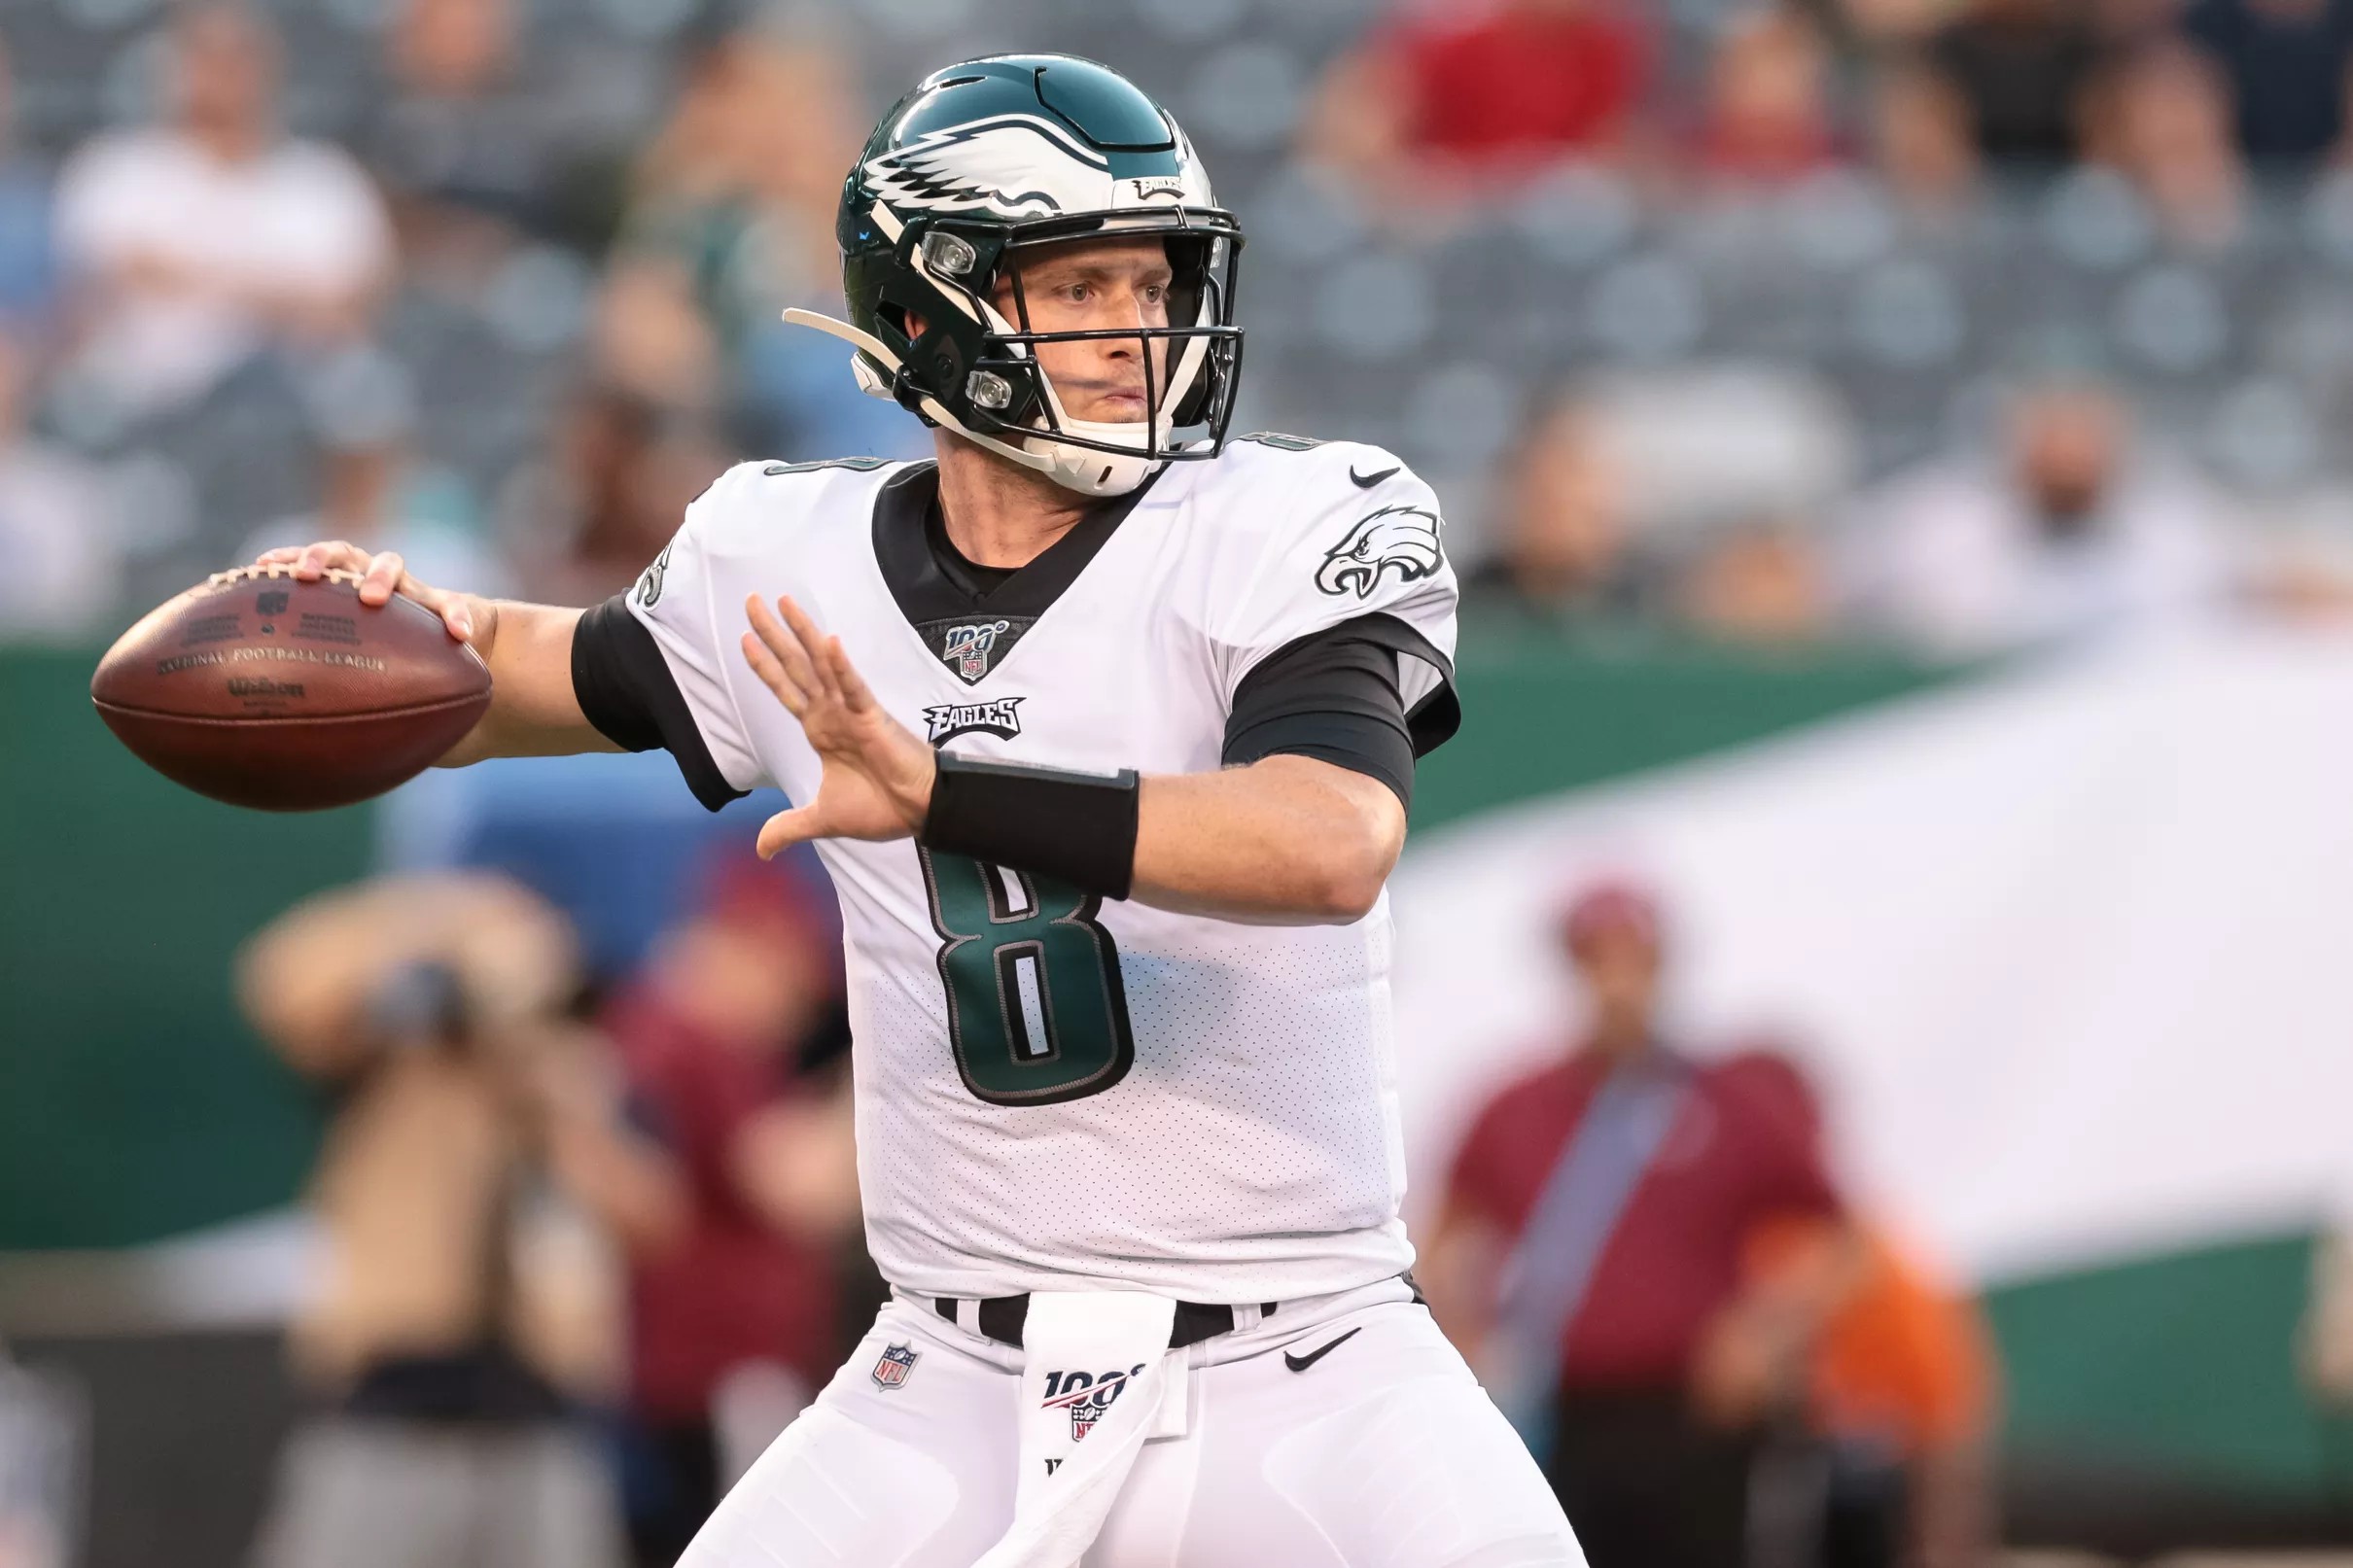 The quarterback the Eagles drafted this year is signing with the Cowboys